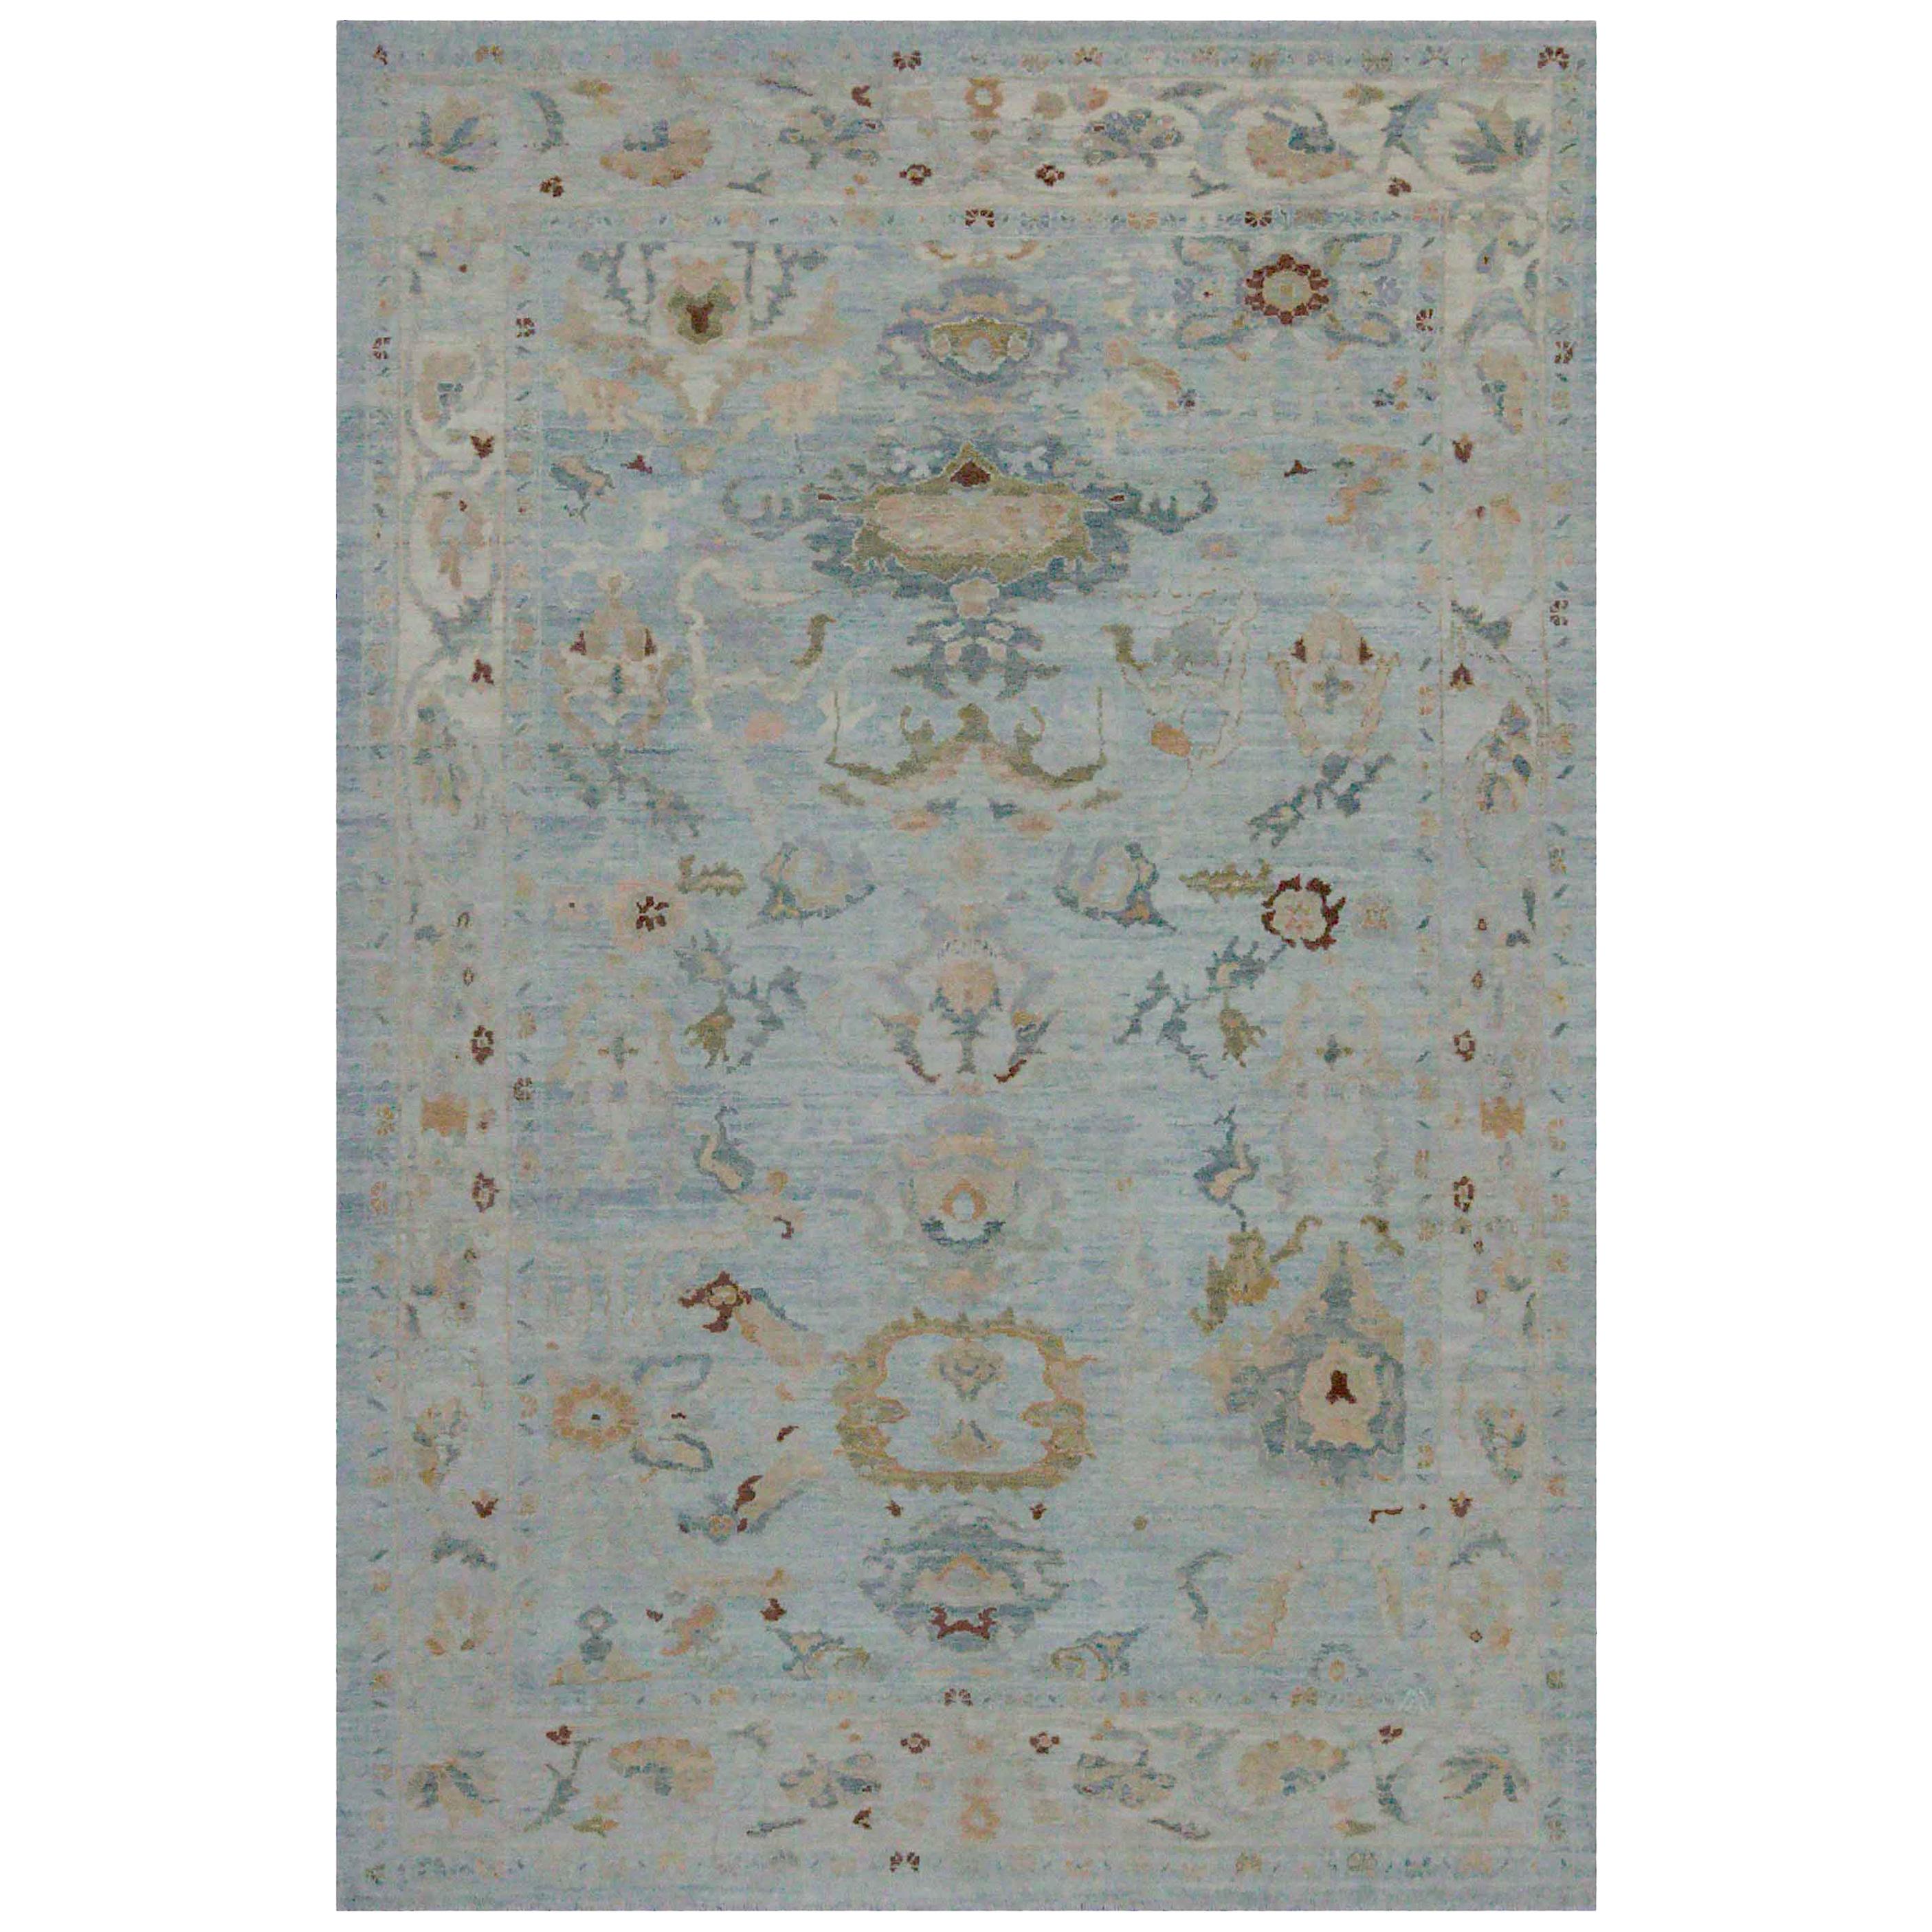 New Turkish Oushak Rug with Green and Beige Floral Details on Blue Field